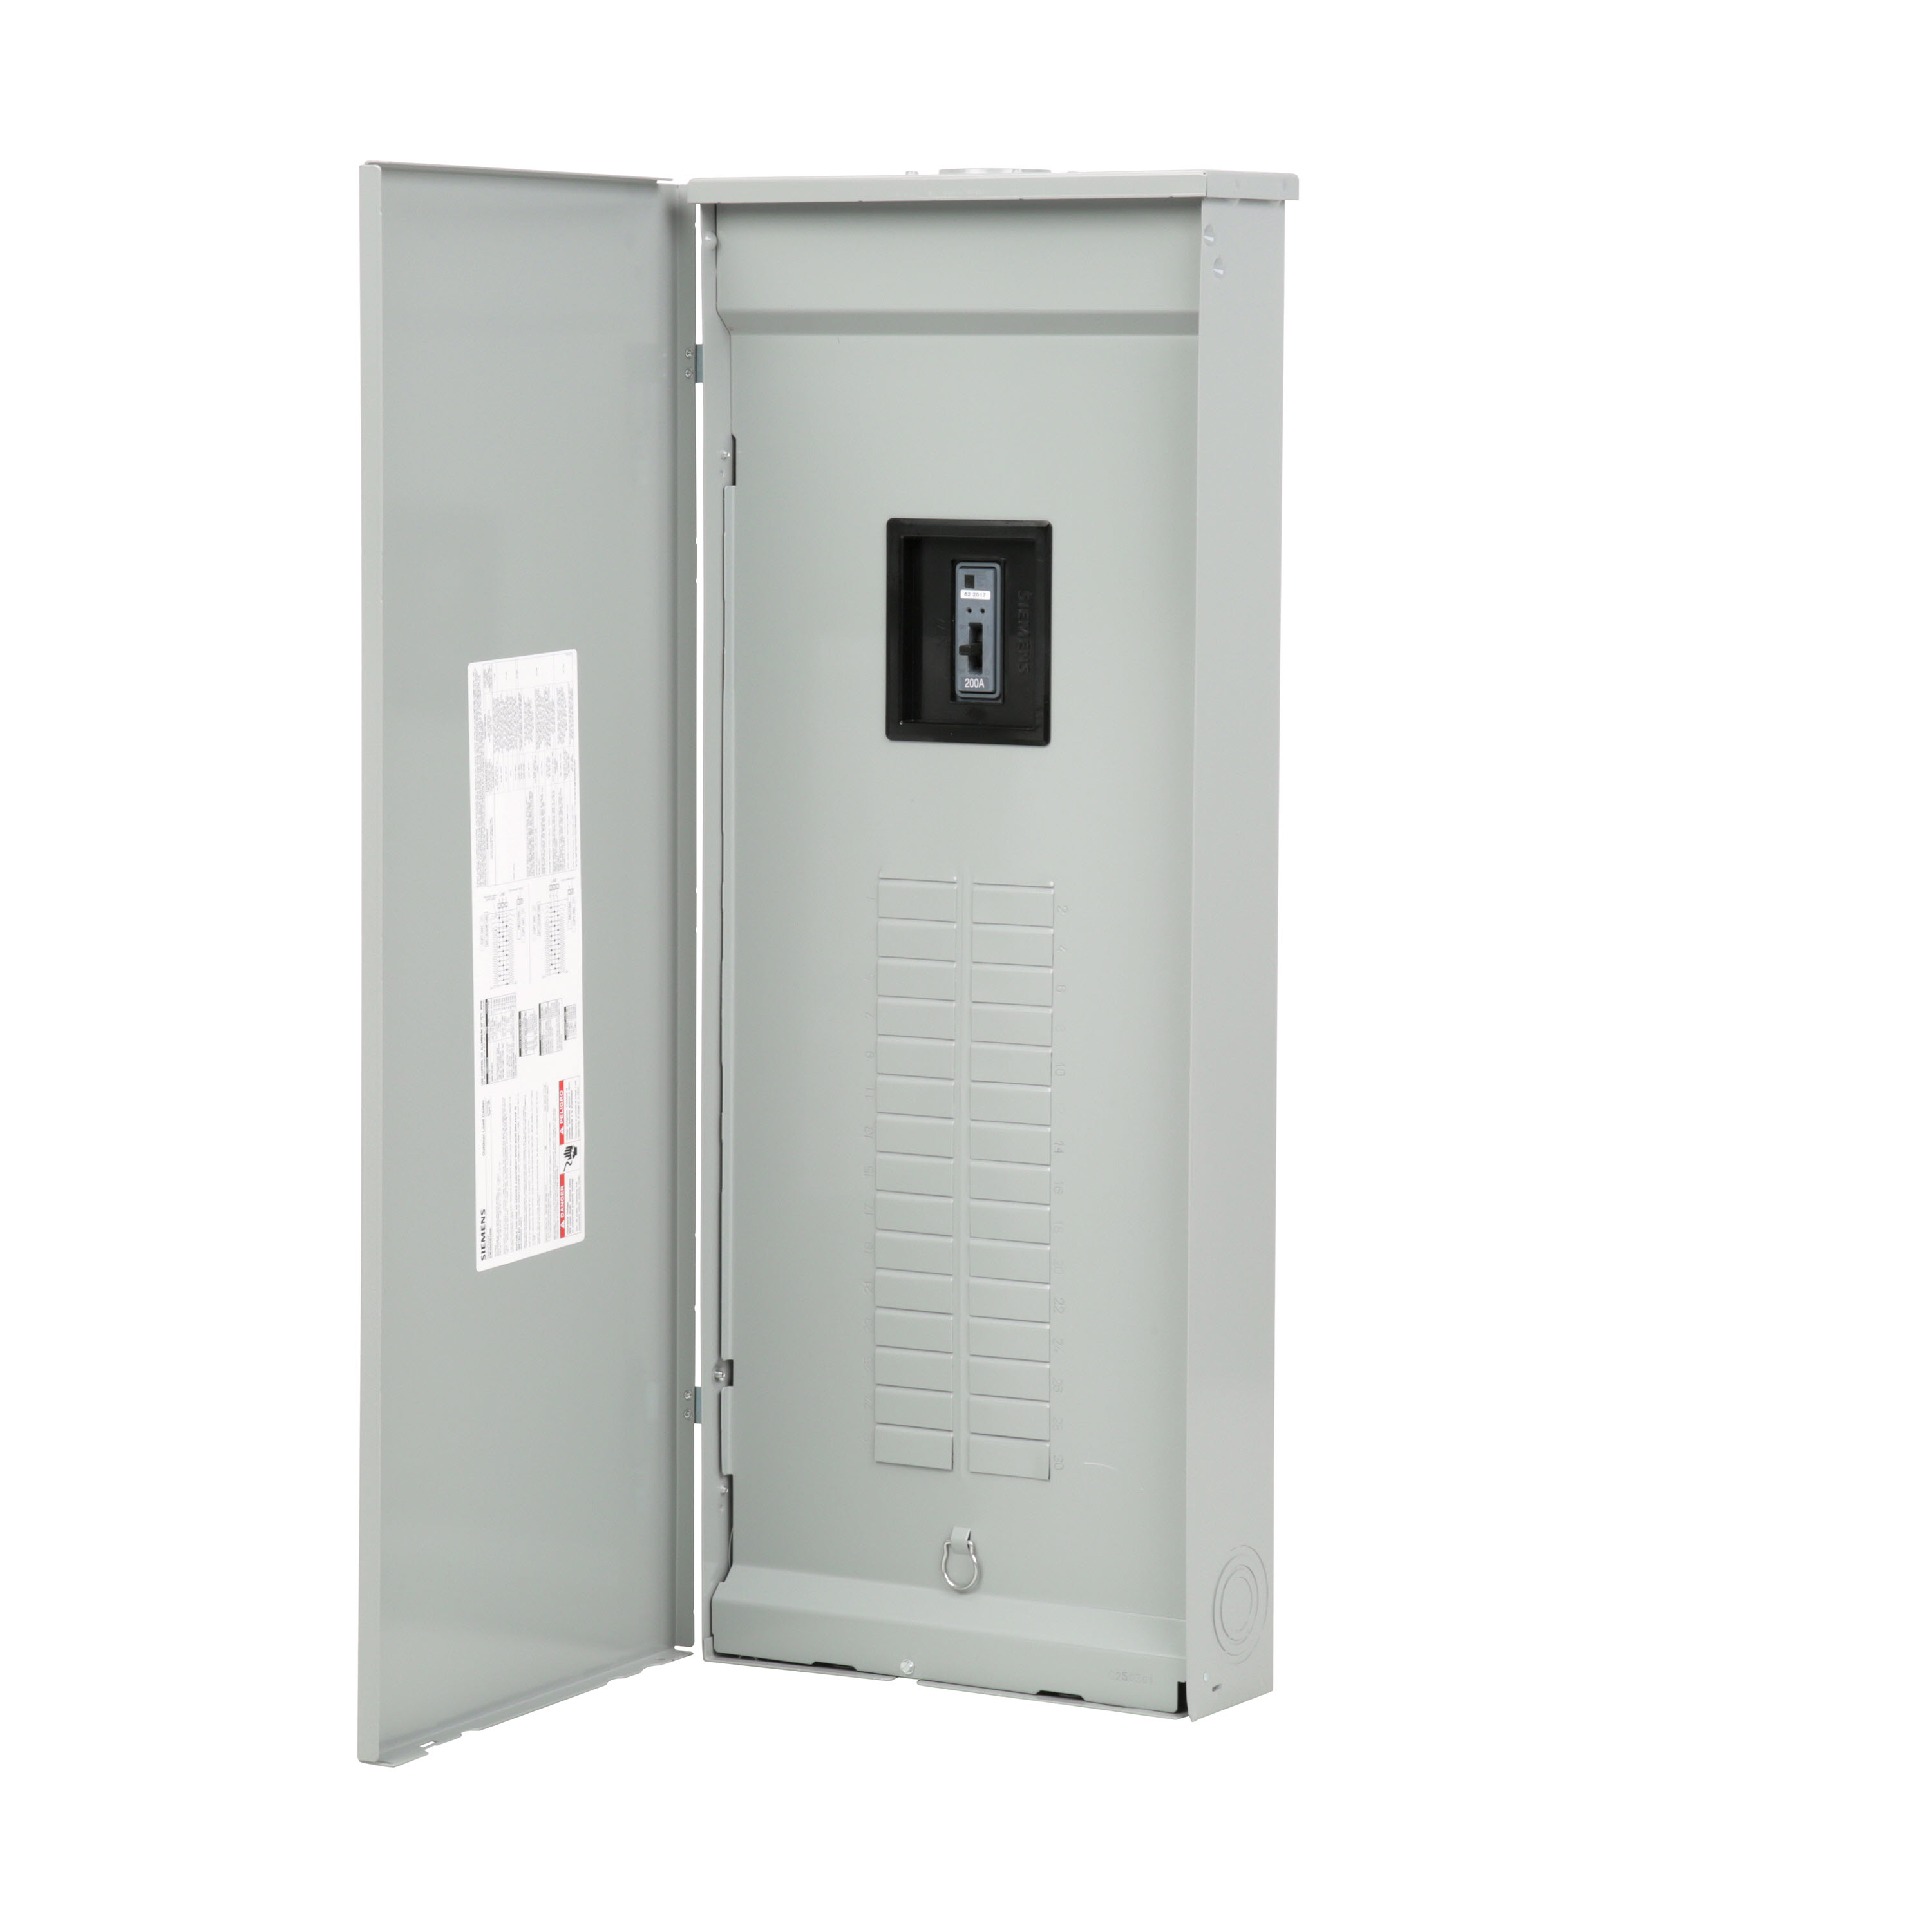 SIEMENS LOW VOLTAGE ES SERIES LOAD CENTER. FACTORY INSTALLED MAIN BREAKER WITH 30 1-INCH SPACES ALLOWING MAX 54 CIRCUITS. 3-PHASE 4-WIRE SYSTEM RATED 120/240V OR 120/208V (200A) 10KA INTERRUPT. SPECIAL FEATURES ALUMINUM BUS, GRAY TRIM, NEMA TYPE3R ENCLOSURE FOR OUTDOOR USE.